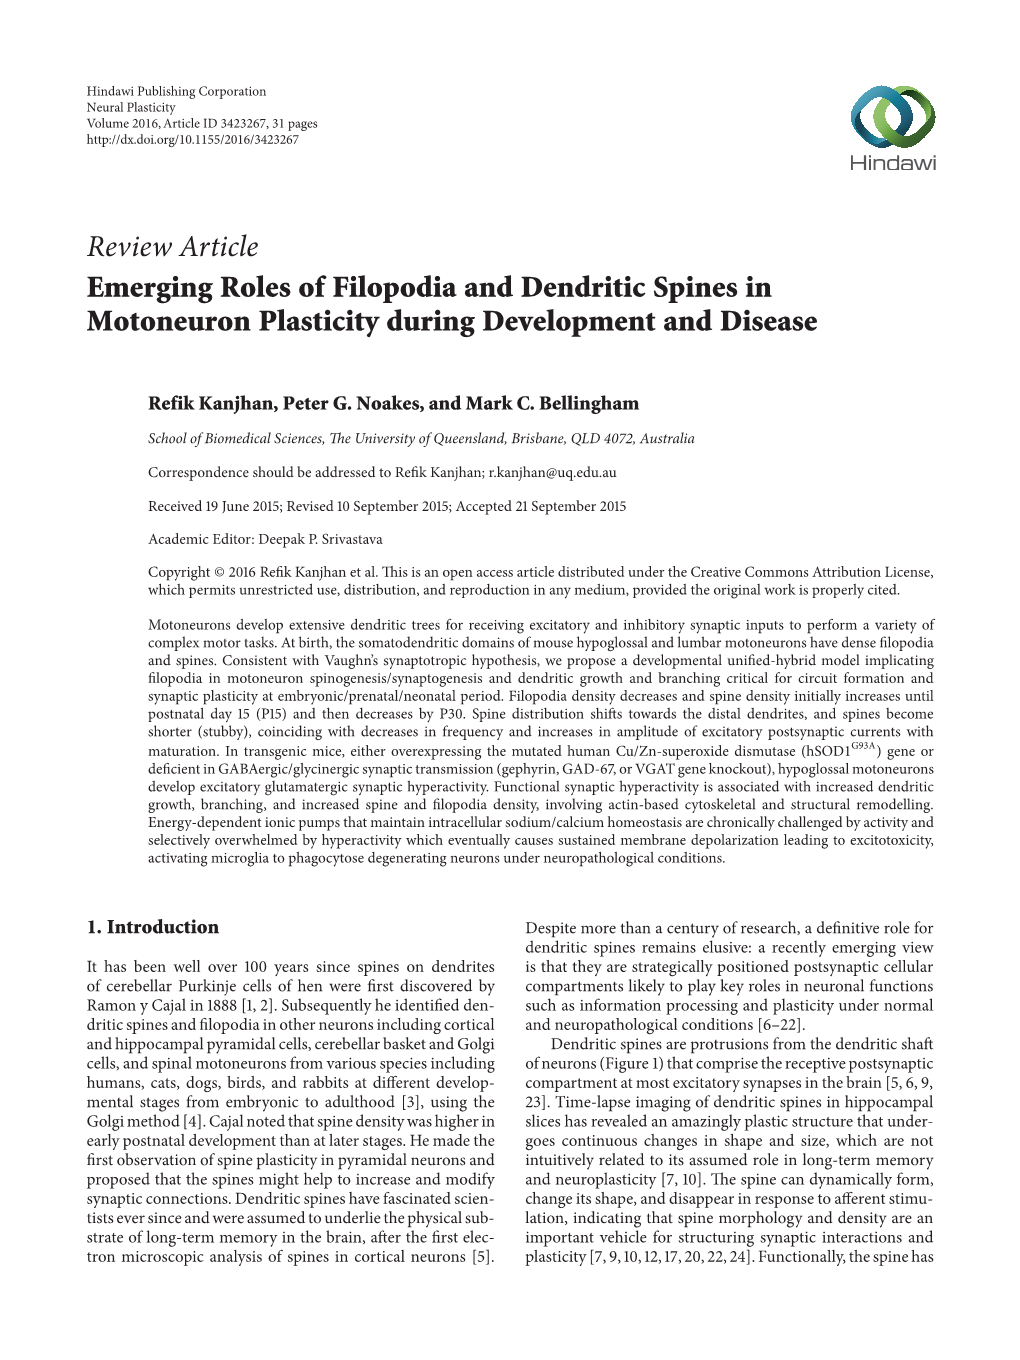 Emerging Roles of Filopodia and Dendritic Spines in Motoneuron Plasticity During Development and Disease